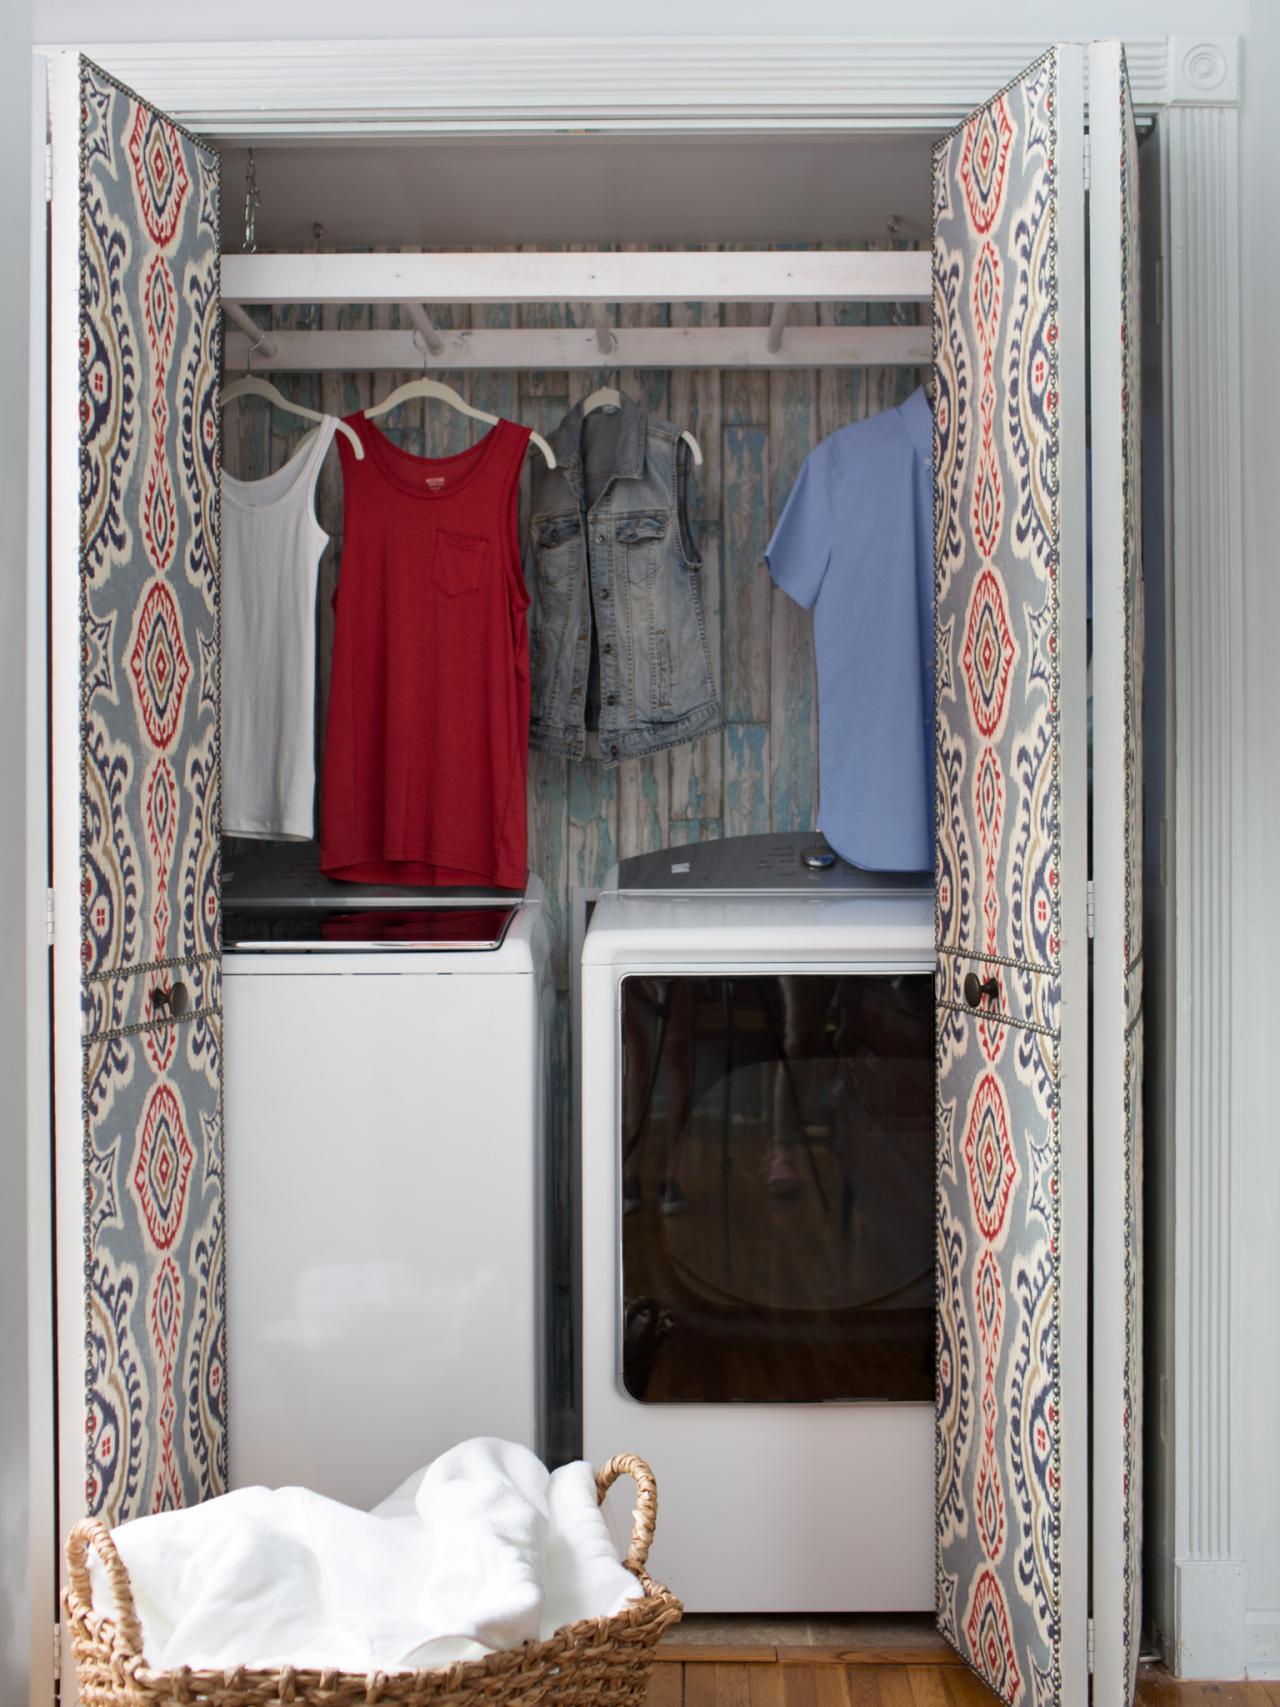 Add a Mudroom or a Laundry in a Small Space | HGTV